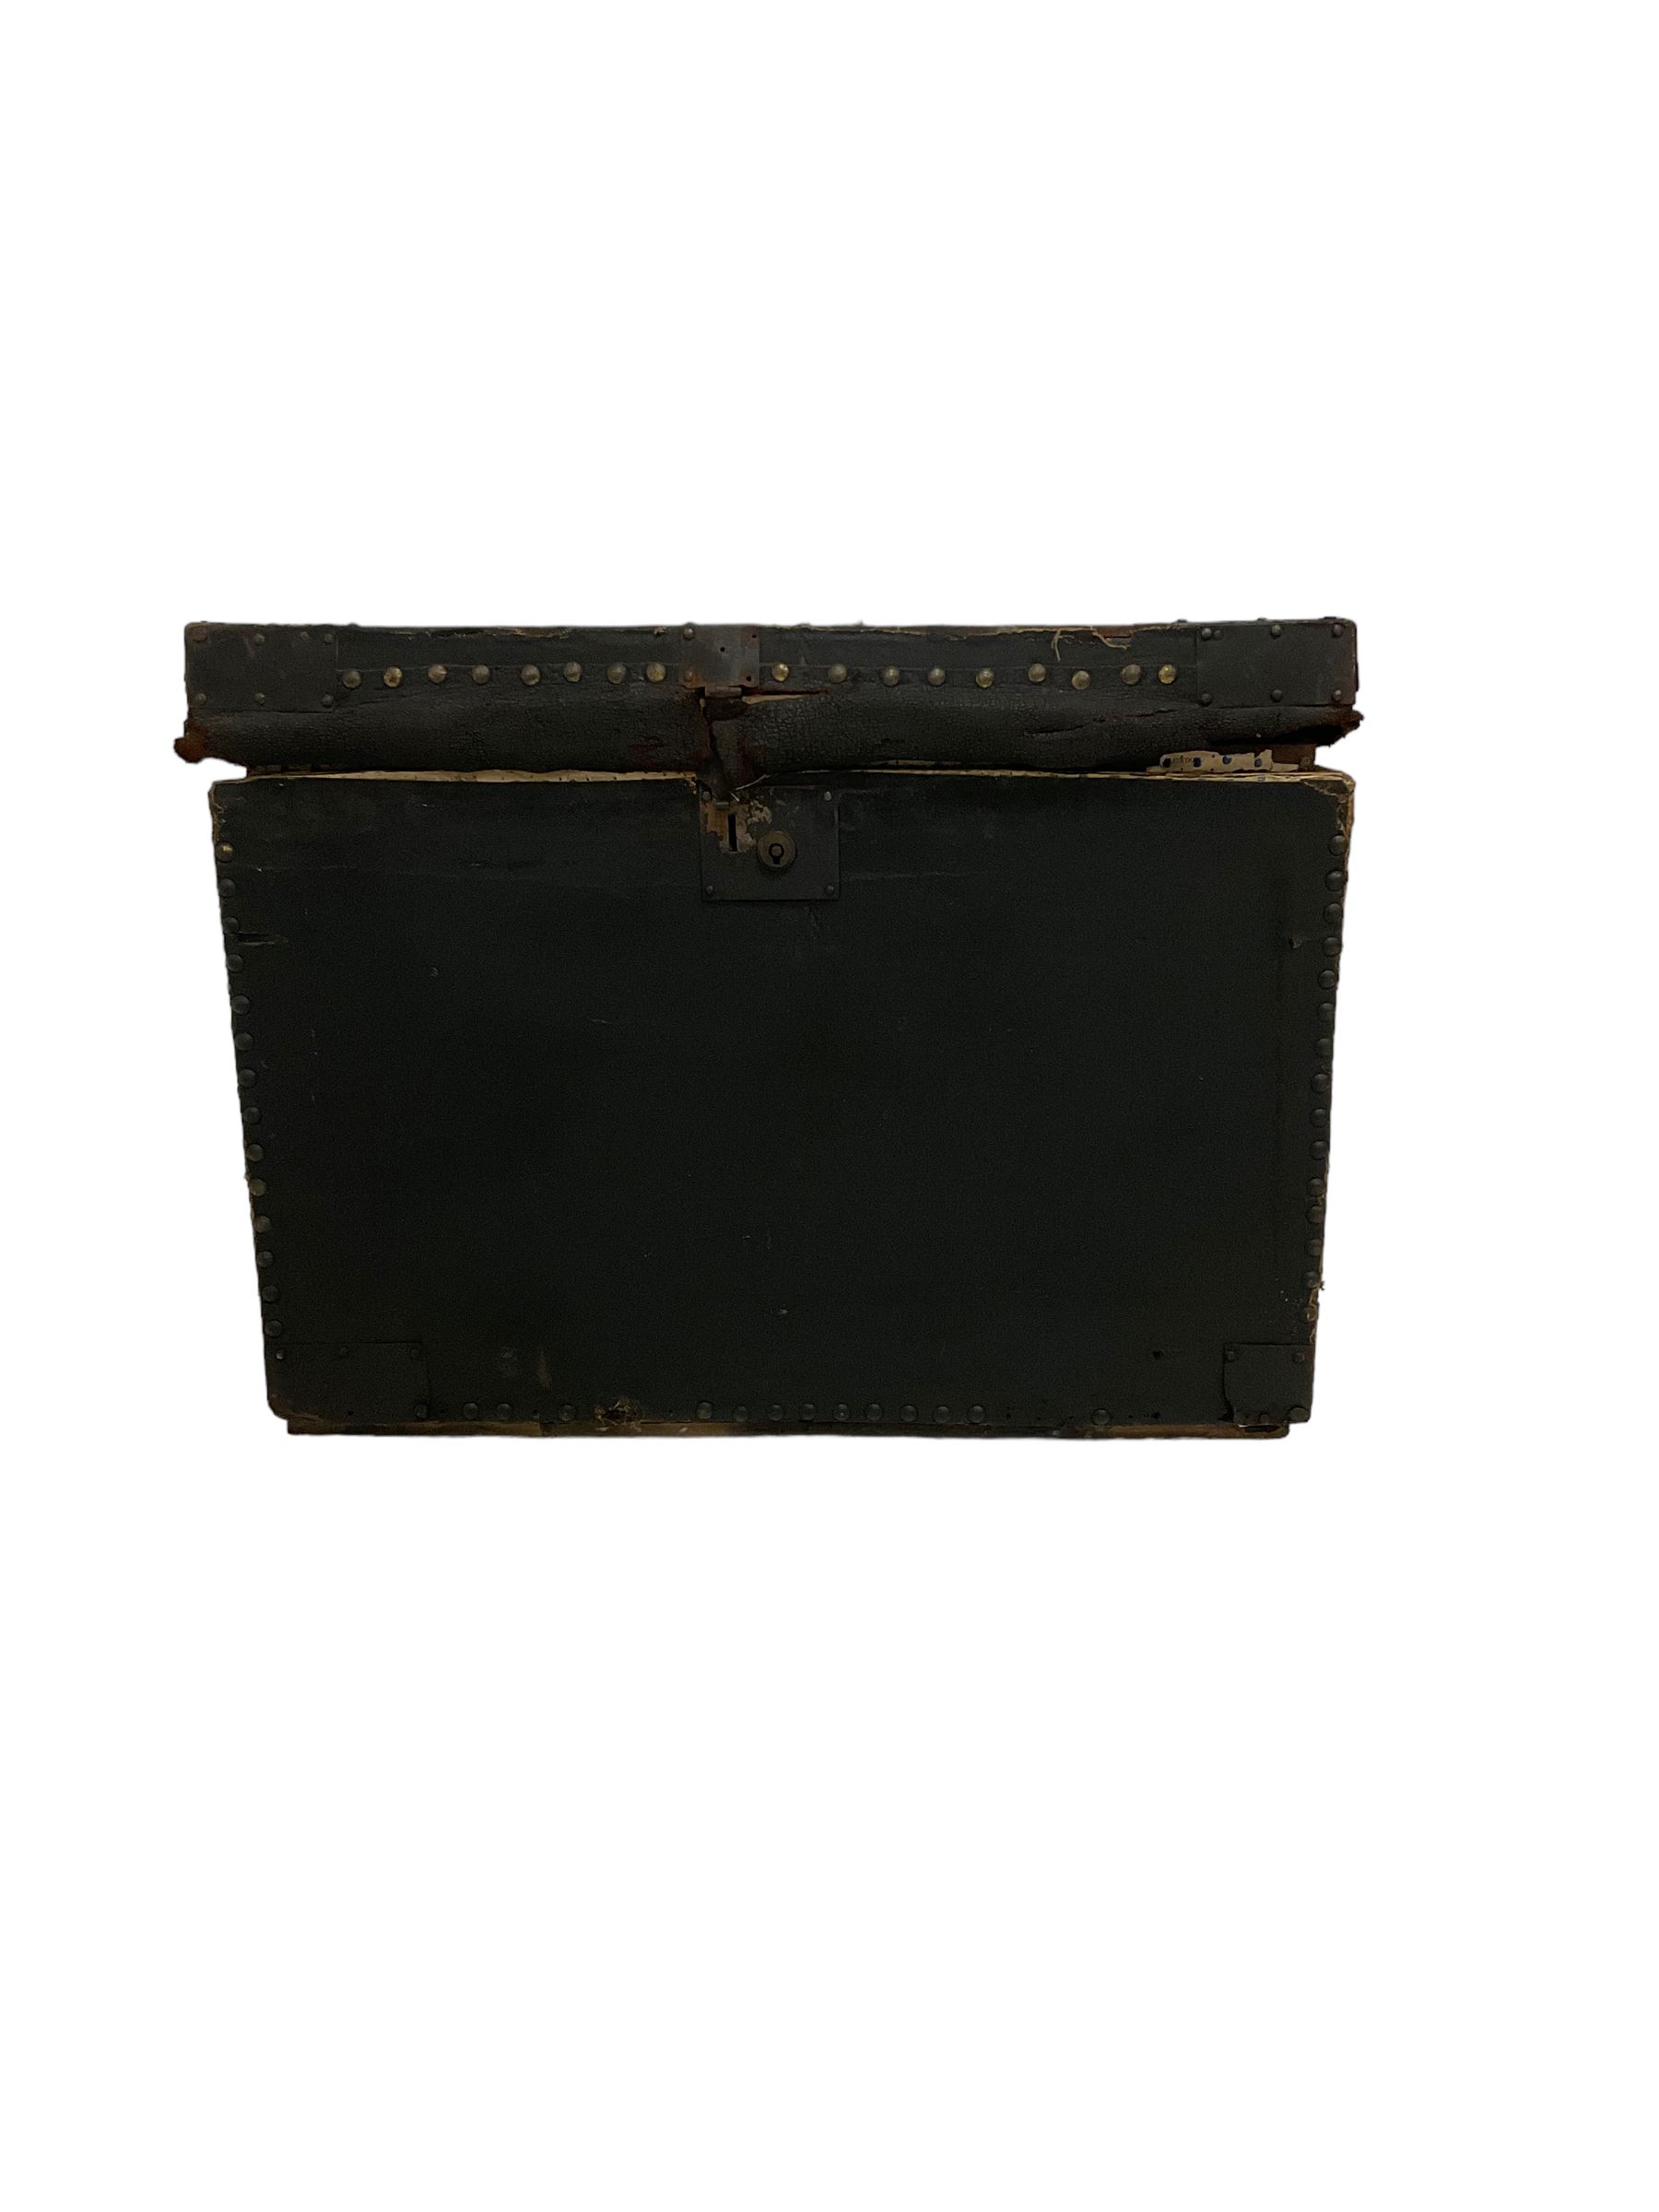 Early 20th century black painted trunk